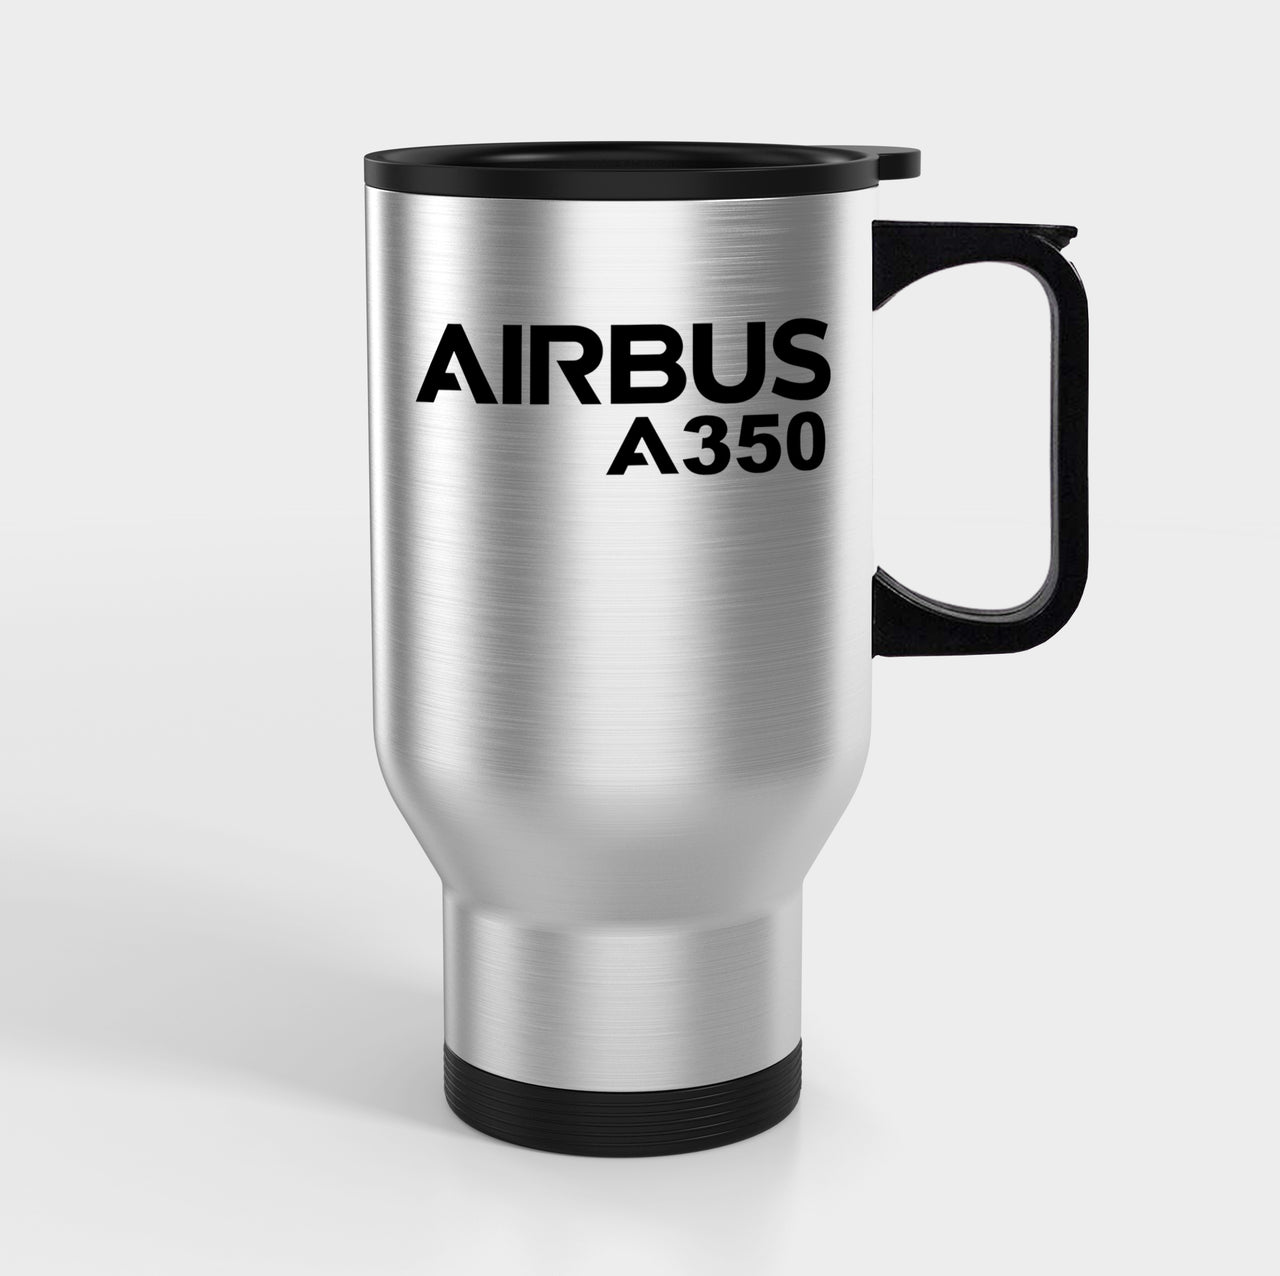 Airbus A350 & Text Designed Travel Mugs (With Holder)